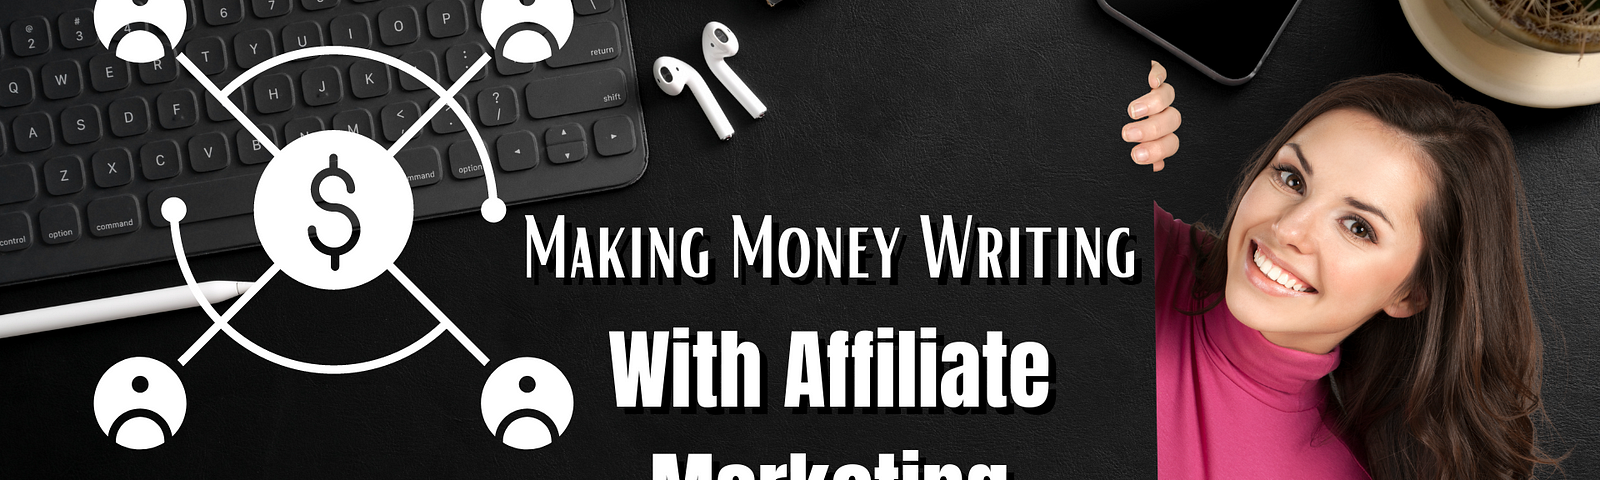 Making Money Writing With Affiliate Marketing Means Building Trust